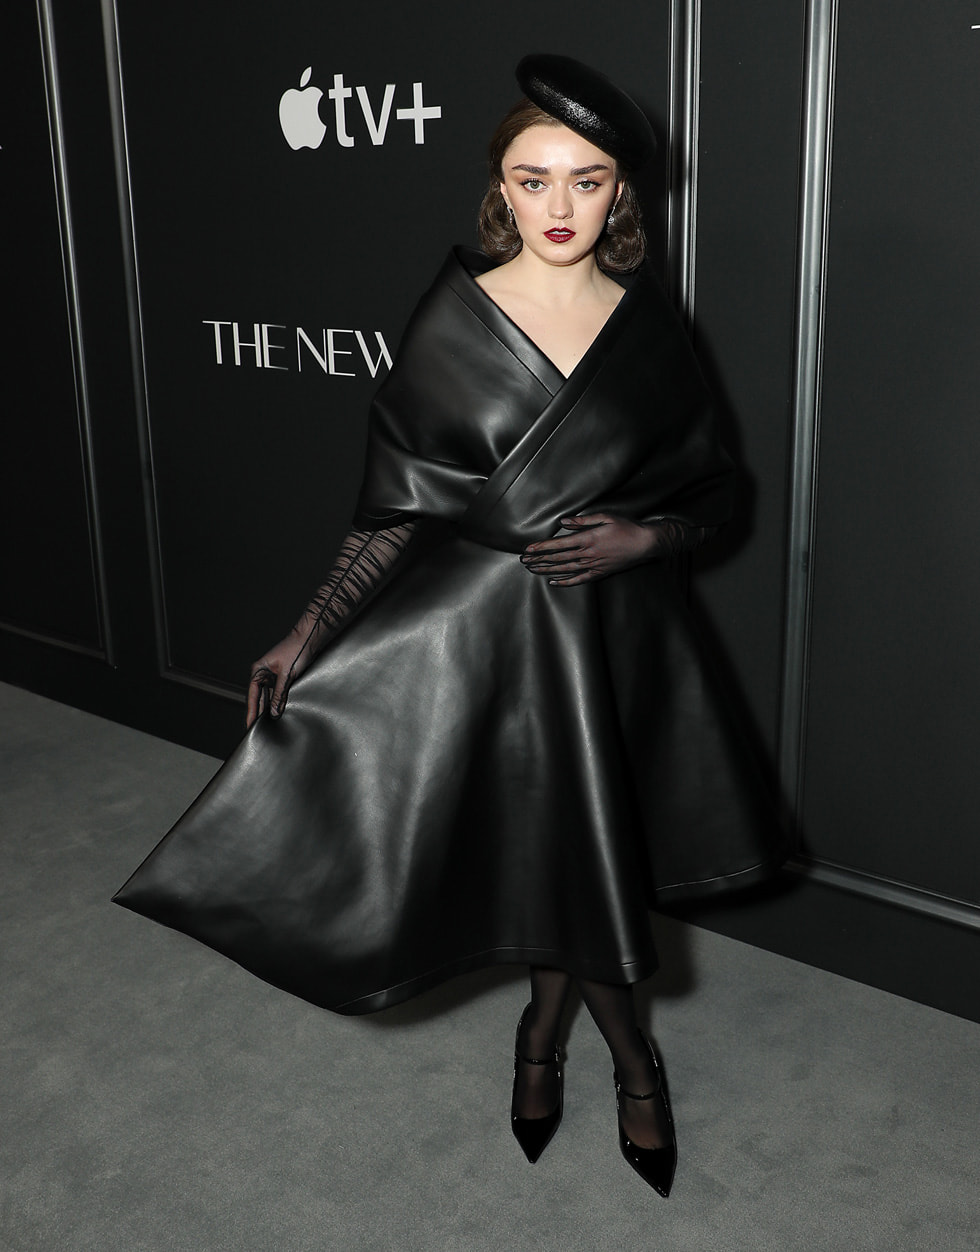 Maisie Williams attends the premiere of the Apple TV+ thrilling series “The New Look” at Florence Gould Hall. “The New Look” will make its global debut on Apple TV+ on Wednesday, 14 February 2024.